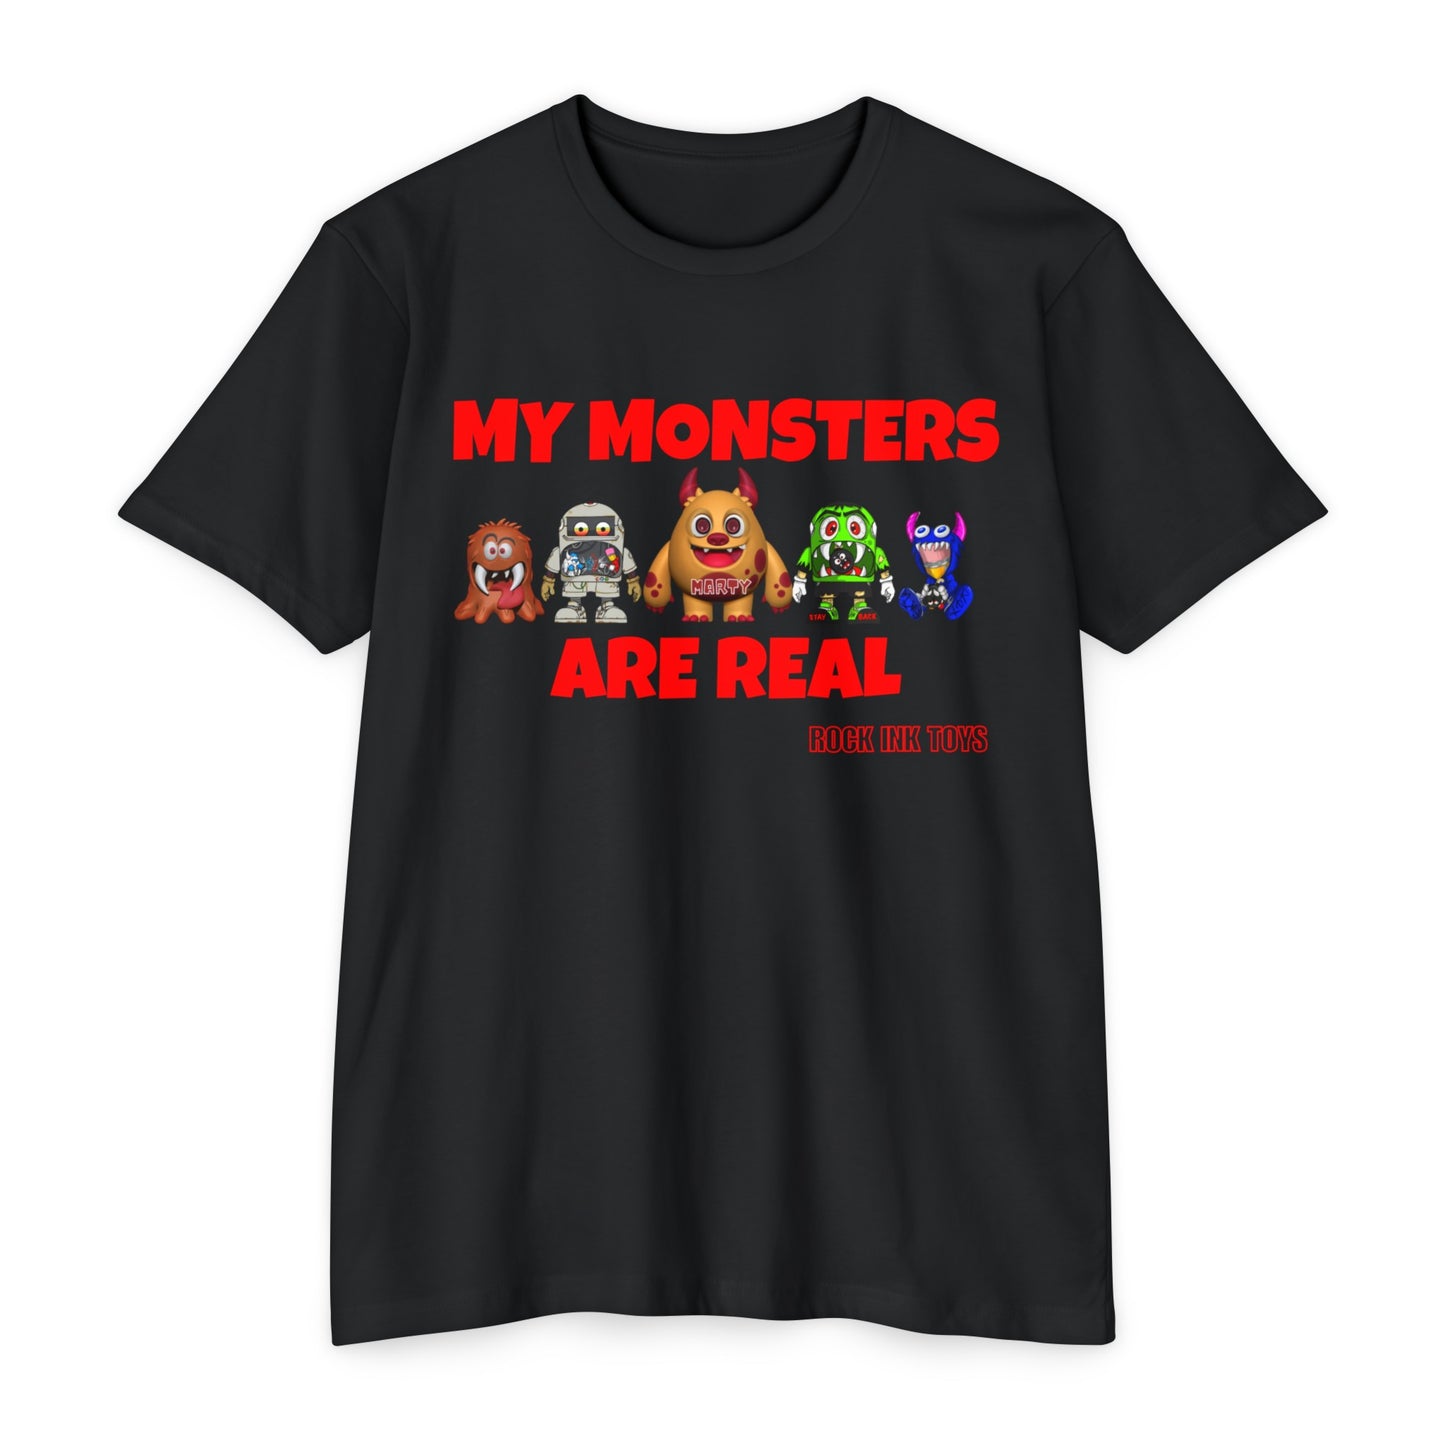 "MY MONSTERS ARE REAL"  T-shirt